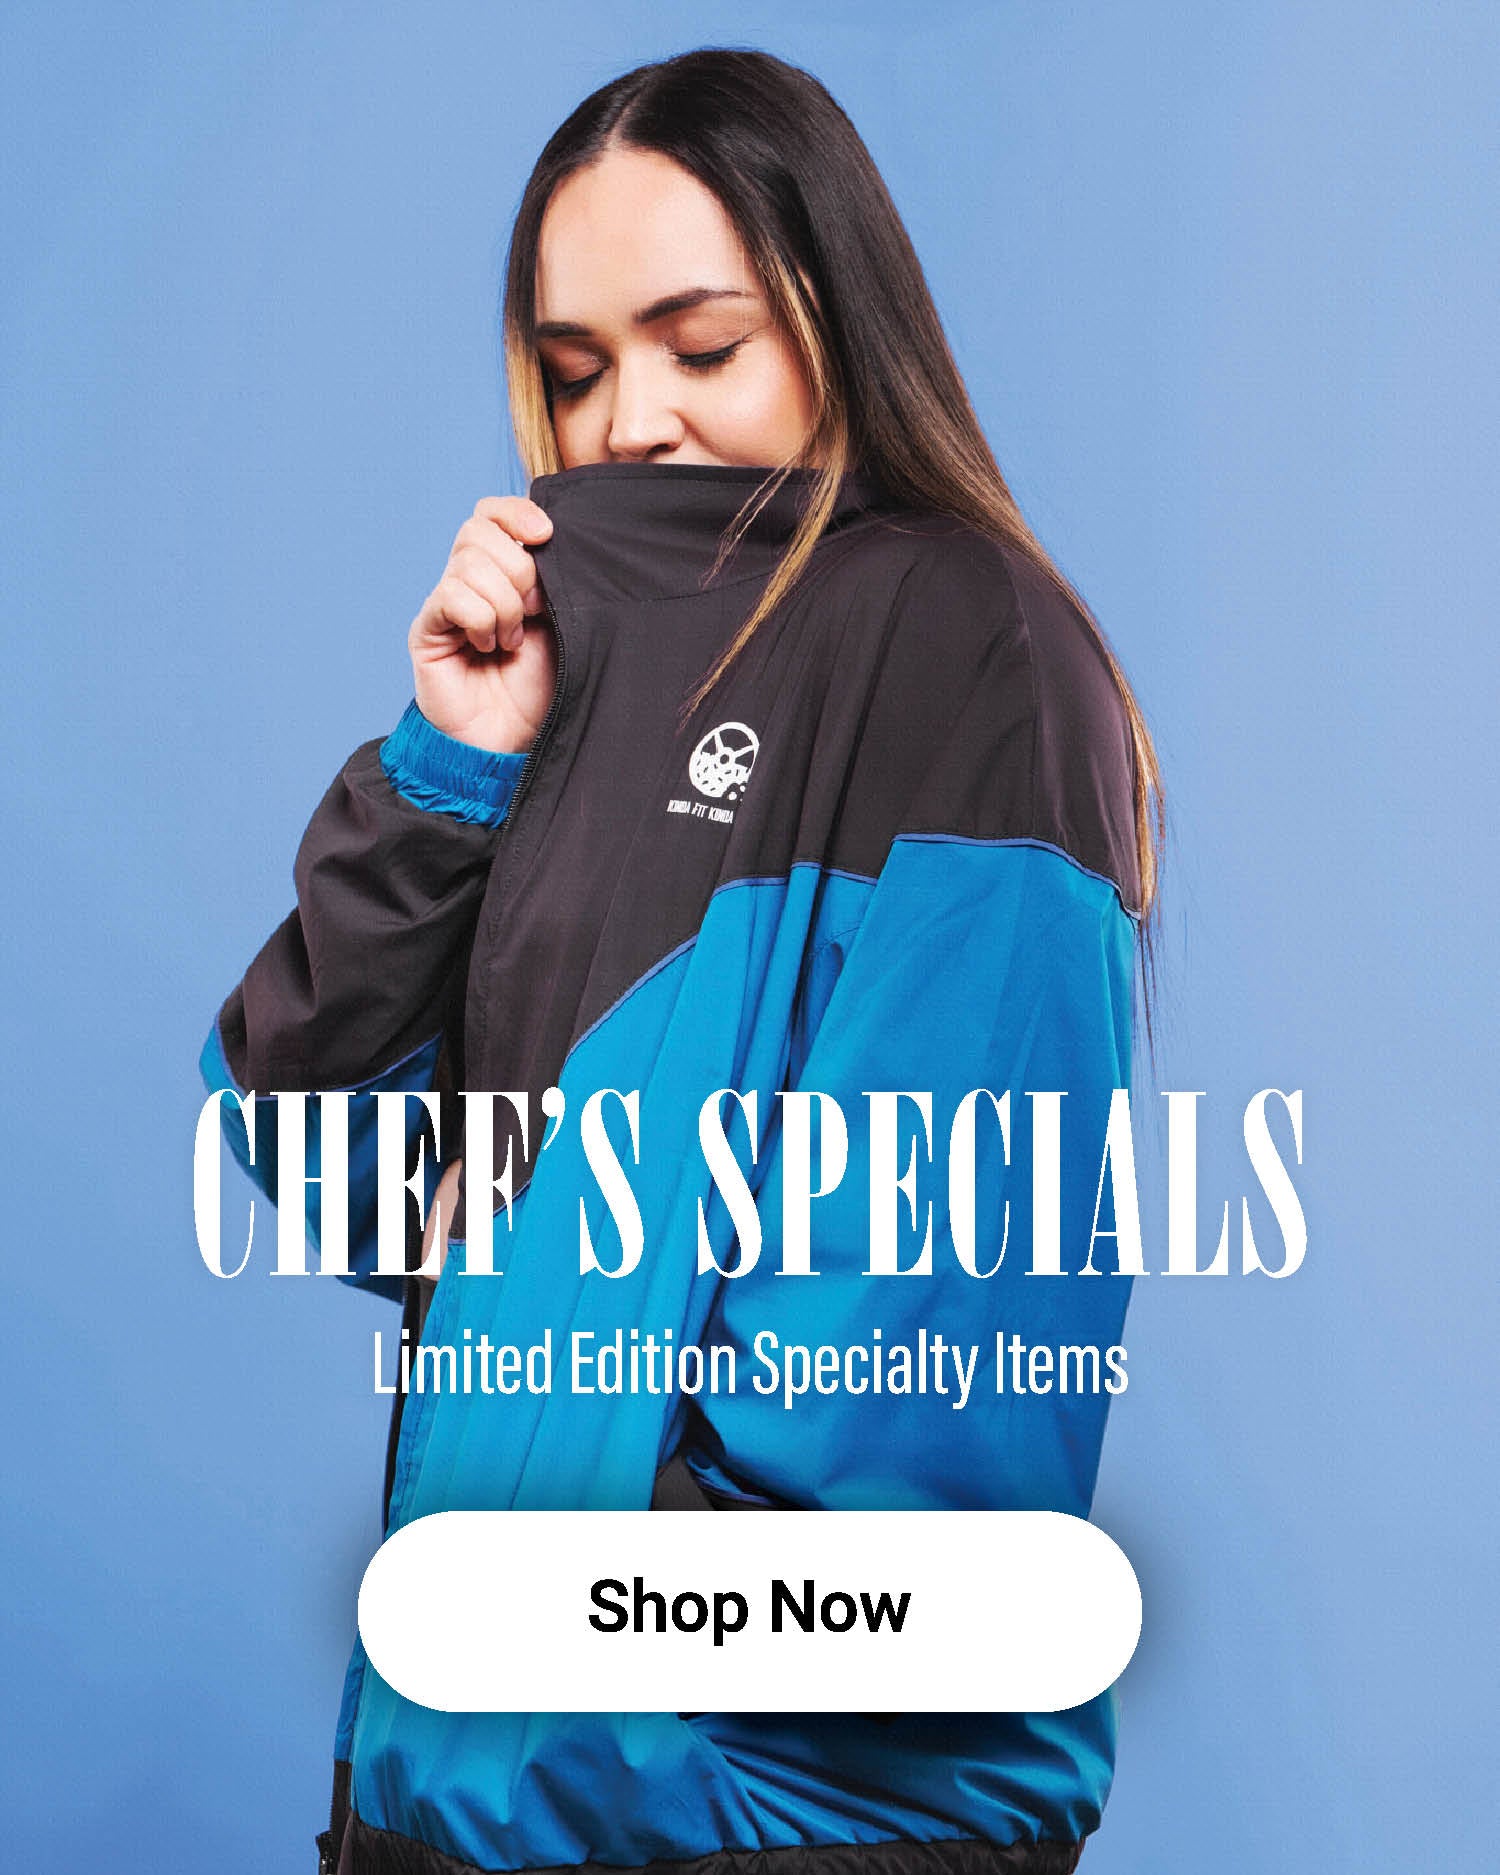 chef specials available in a track jacket, dog hoodie, coach's jacket, seaweed inspired designs, and anorak - shop now